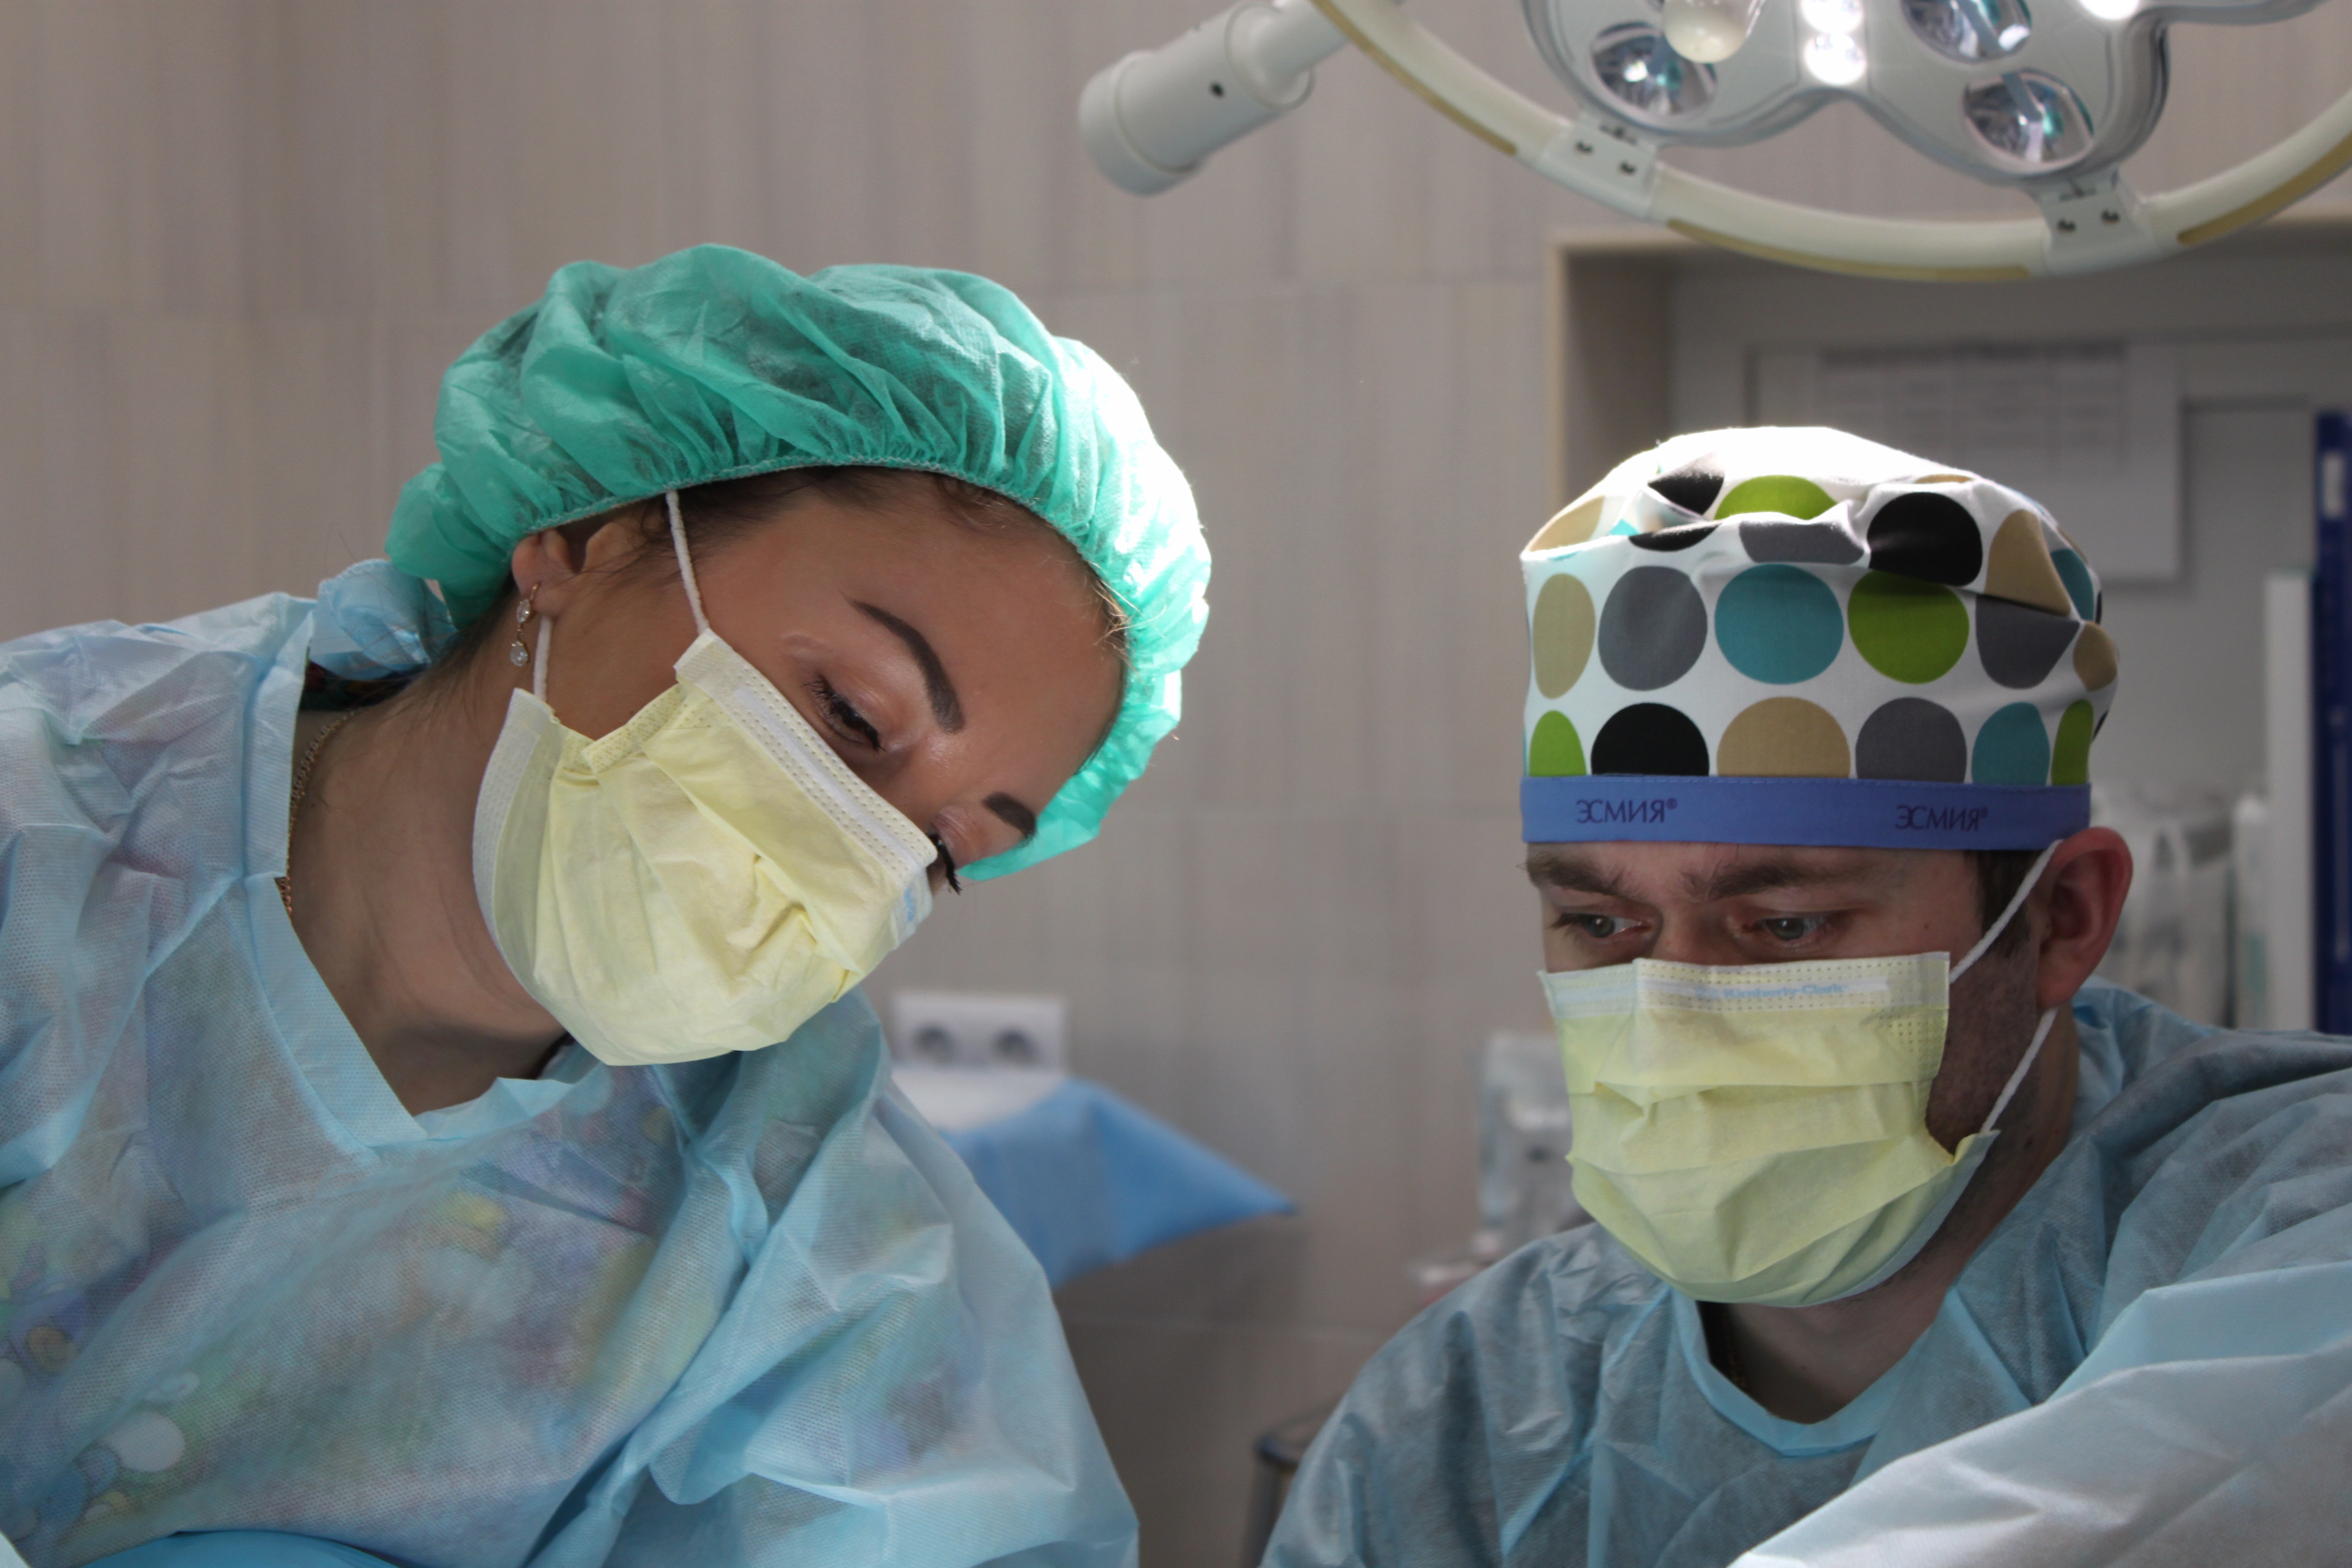 #What You Should Ask Your Surgeon Before Cosmetic Surgery